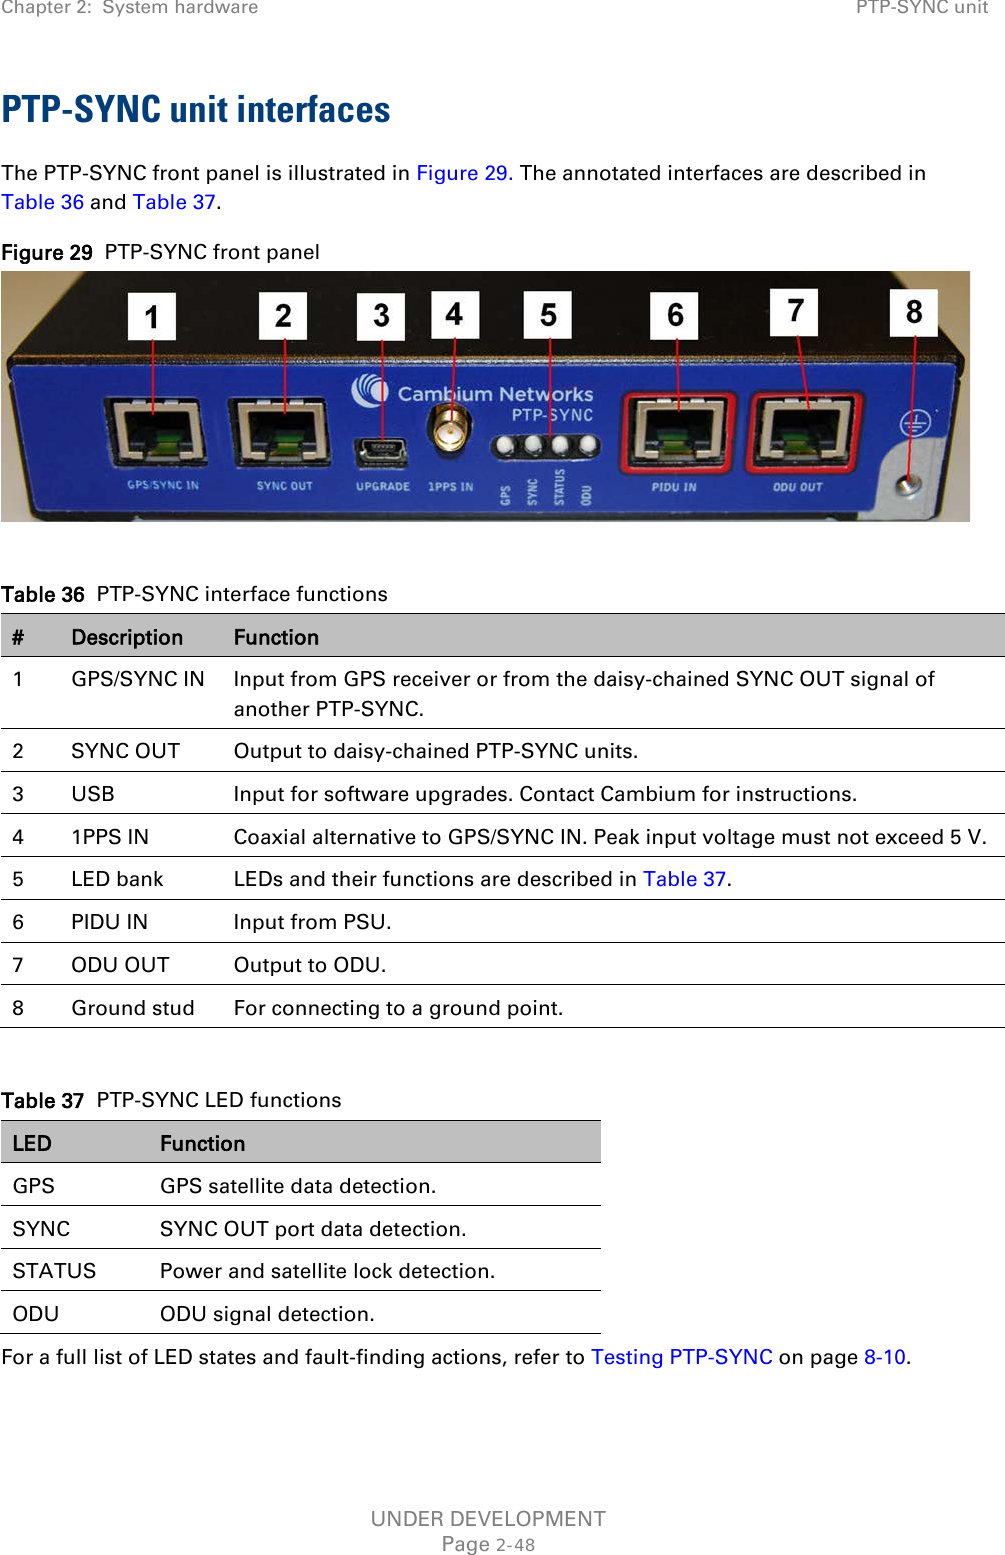 Chapter 2:  System hardware PTP-SYNC unit  PTP-SYNC unit interfaces The PTP-SYNC front panel is illustrated in Figure 29. The annotated interfaces are described in Table 36 and Table 37. Figure 29  PTP-SYNC front panel   Table 36  PTP-SYNC interface functions # Description Function 1  GPS/SYNC IN Input from GPS receiver or from the daisy-chained SYNC OUT signal of another PTP-SYNC. 2  SYNC OUT Output to daisy-chained PTP-SYNC units. 3  USB Input for software upgrades. Contact Cambium for instructions. 4  1PPS IN Coaxial alternative to GPS/SYNC IN. Peak input voltage must not exceed 5 V. 5  LED bank LEDs and their functions are described in Table 37. 6  PIDU IN Input from PSU. 7  ODU OUT Output to ODU. 8  Ground stud For connecting to a ground point.  Table 37  PTP-SYNC LED functions LED Function GPS GPS satellite data detection. SYNC SYNC OUT port data detection. STATUS Power and satellite lock detection. ODU ODU signal detection. For a full list of LED states and fault-finding actions, refer to Testing PTP-SYNC on page 8-10.   UNDER DEVELOPMENT Page 2-48 